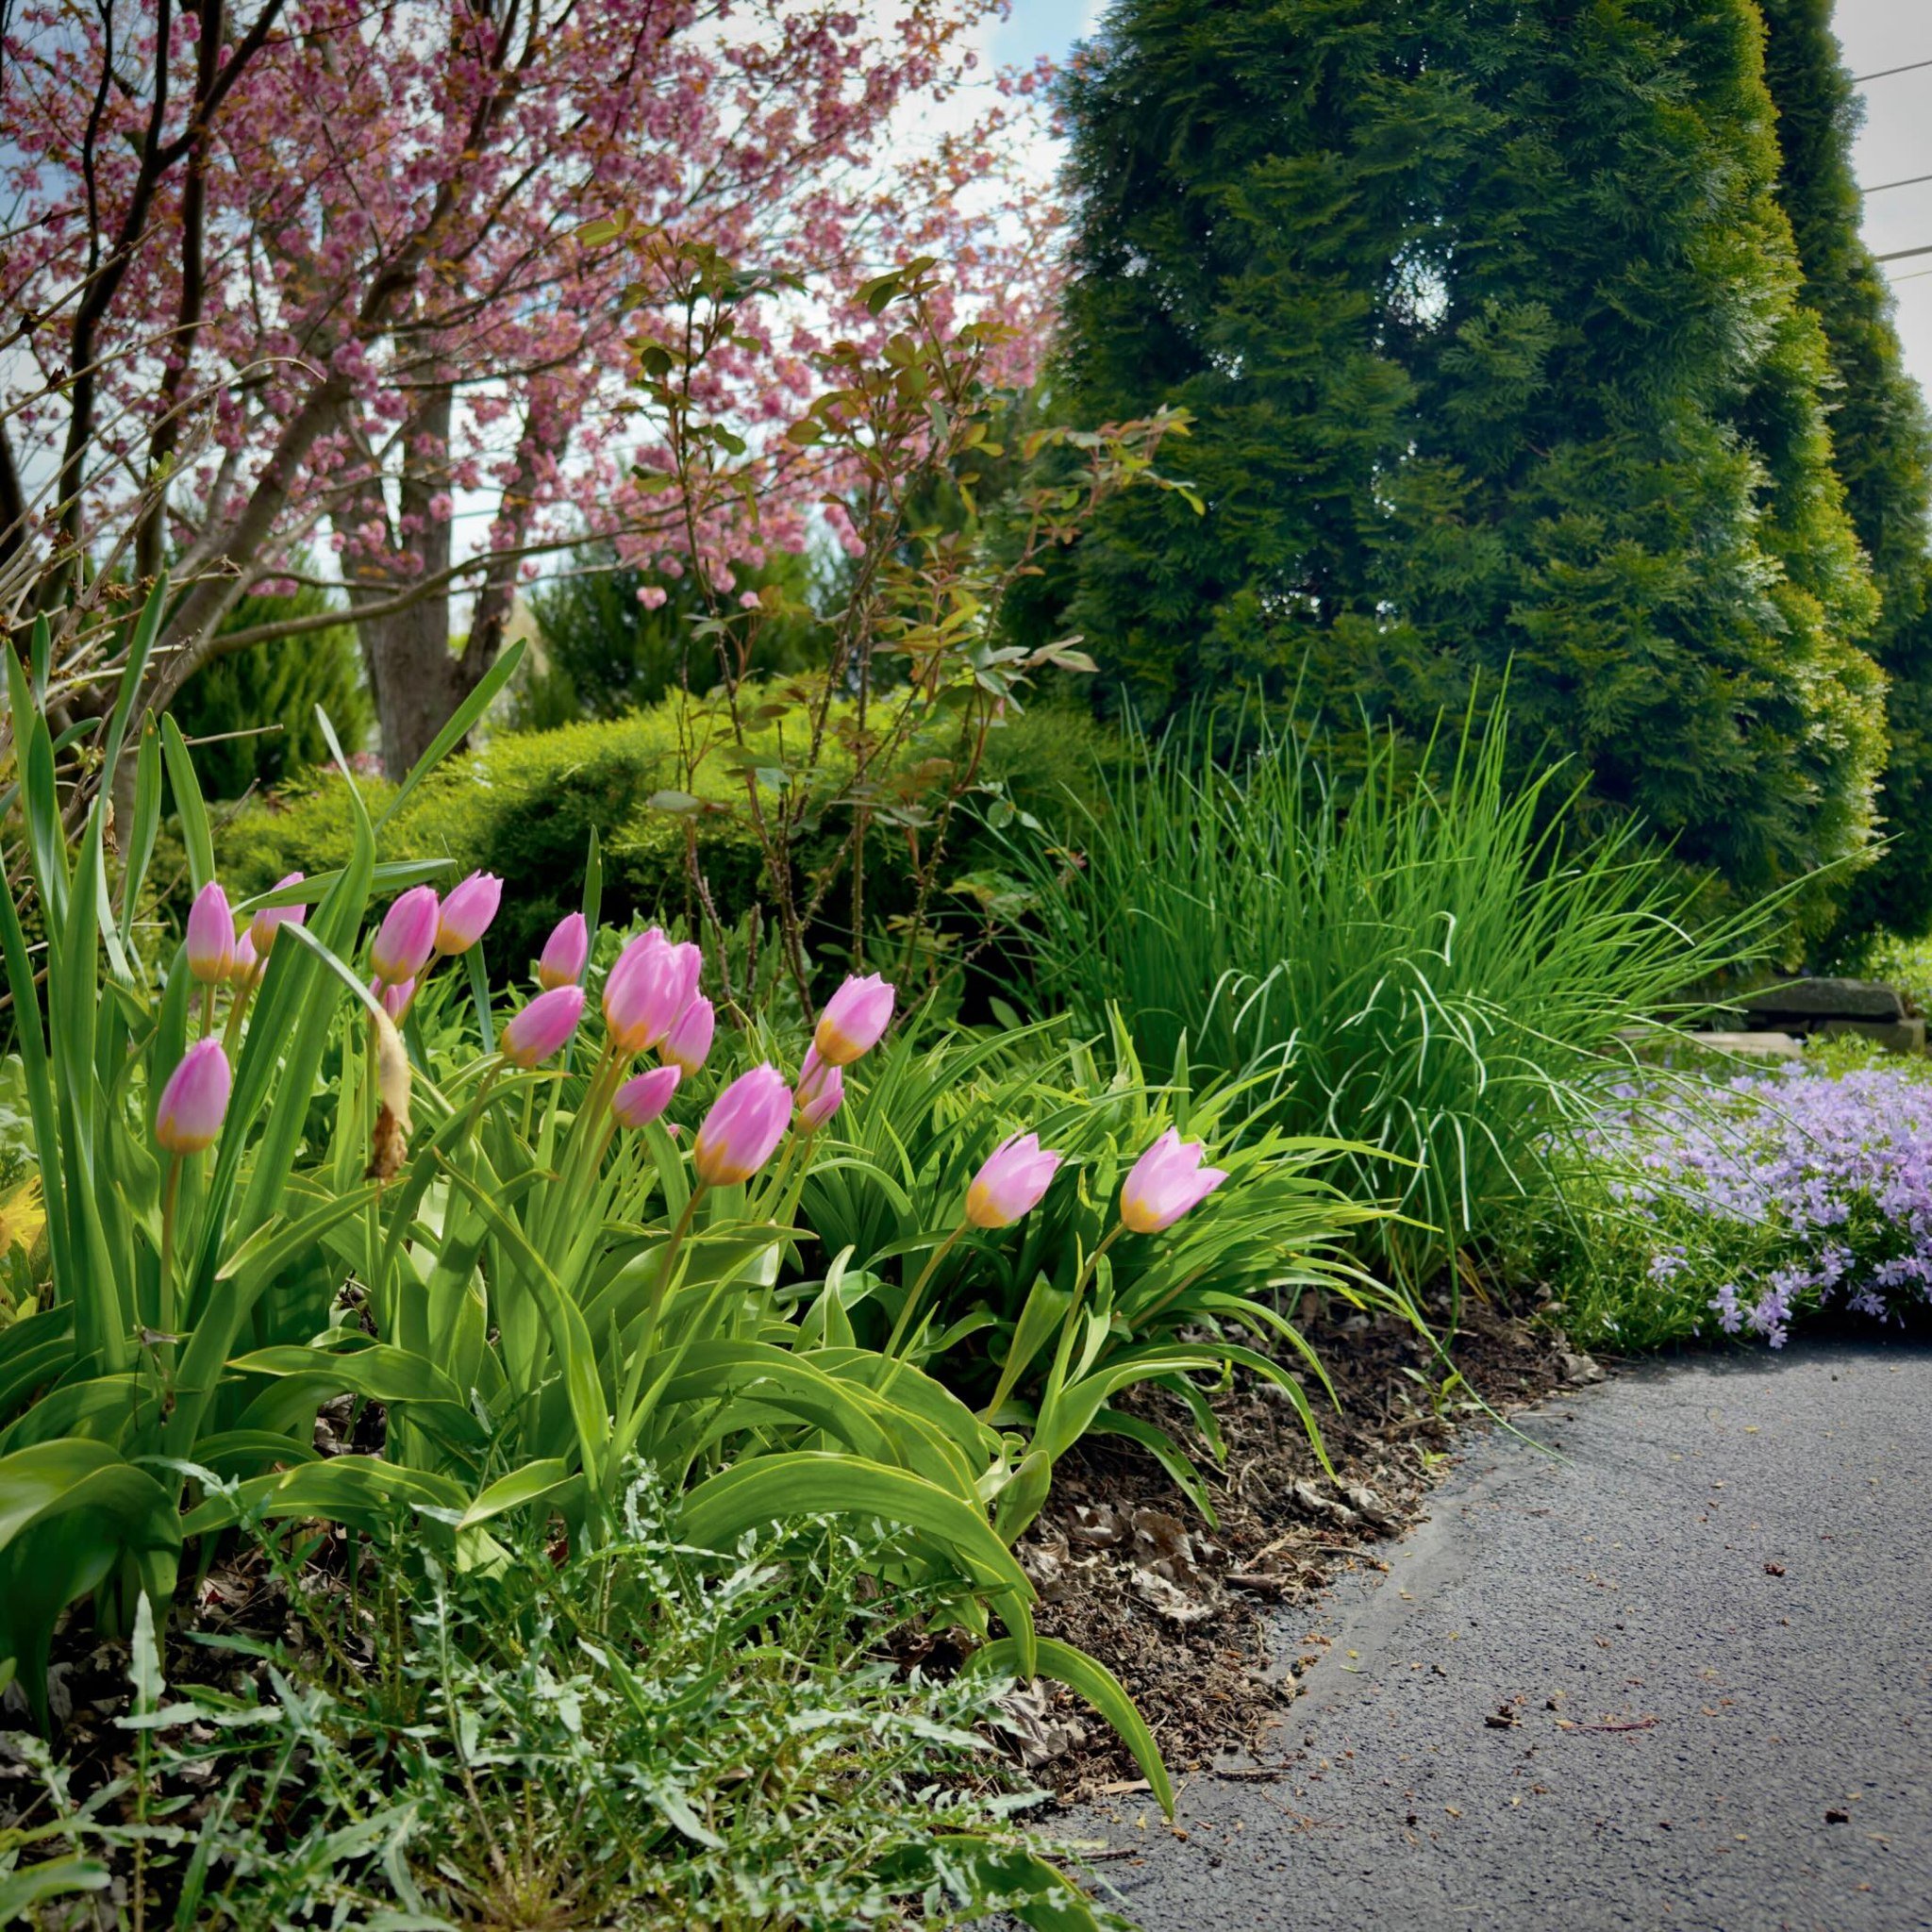 Did you know there are tulip varieties resistant to deer and bunnies? Tom, who opened his garden in Pendleton on Open Gardens WNY, shared this tip. Not only are they critter-resistant, but they also naturalize beautifully. Tom planted just three bulb